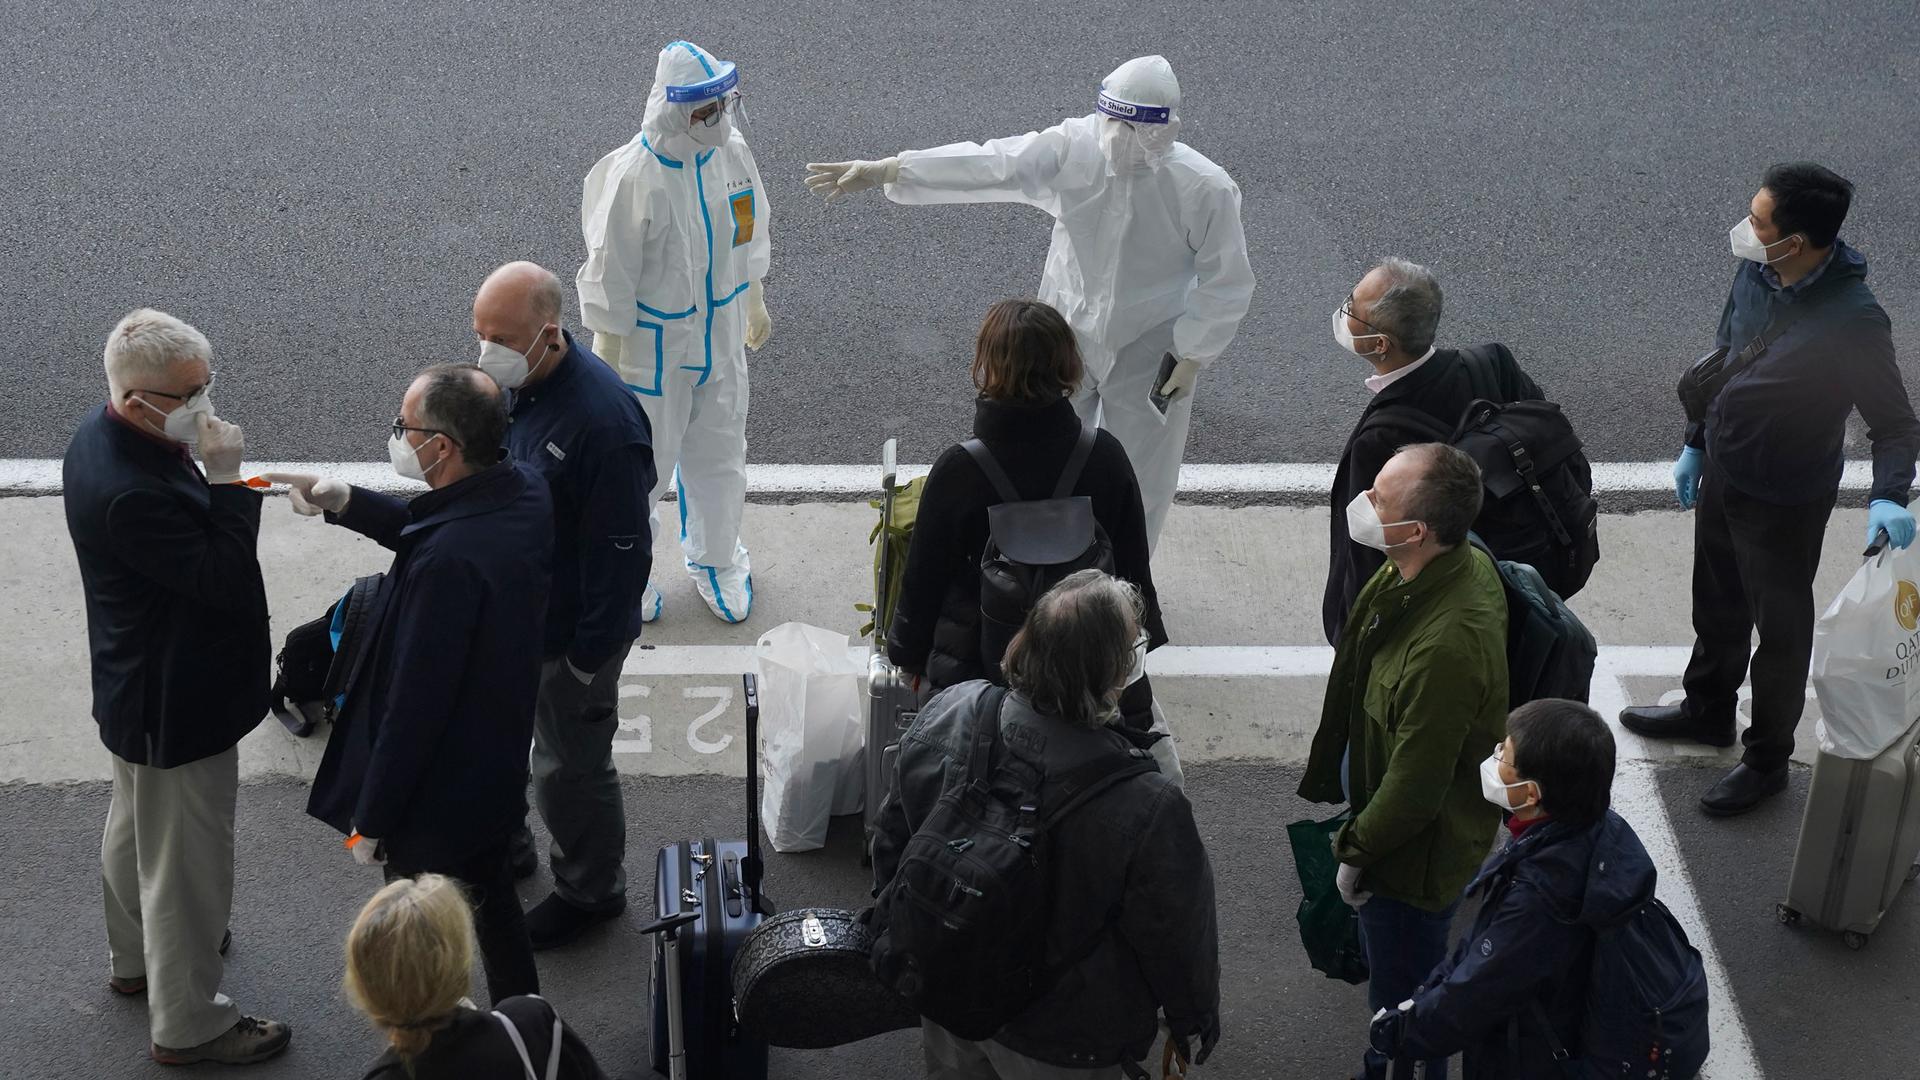 A small crowd of people are shown standing on a sidewalk with two people wearing white medical protective clothing and face masks.